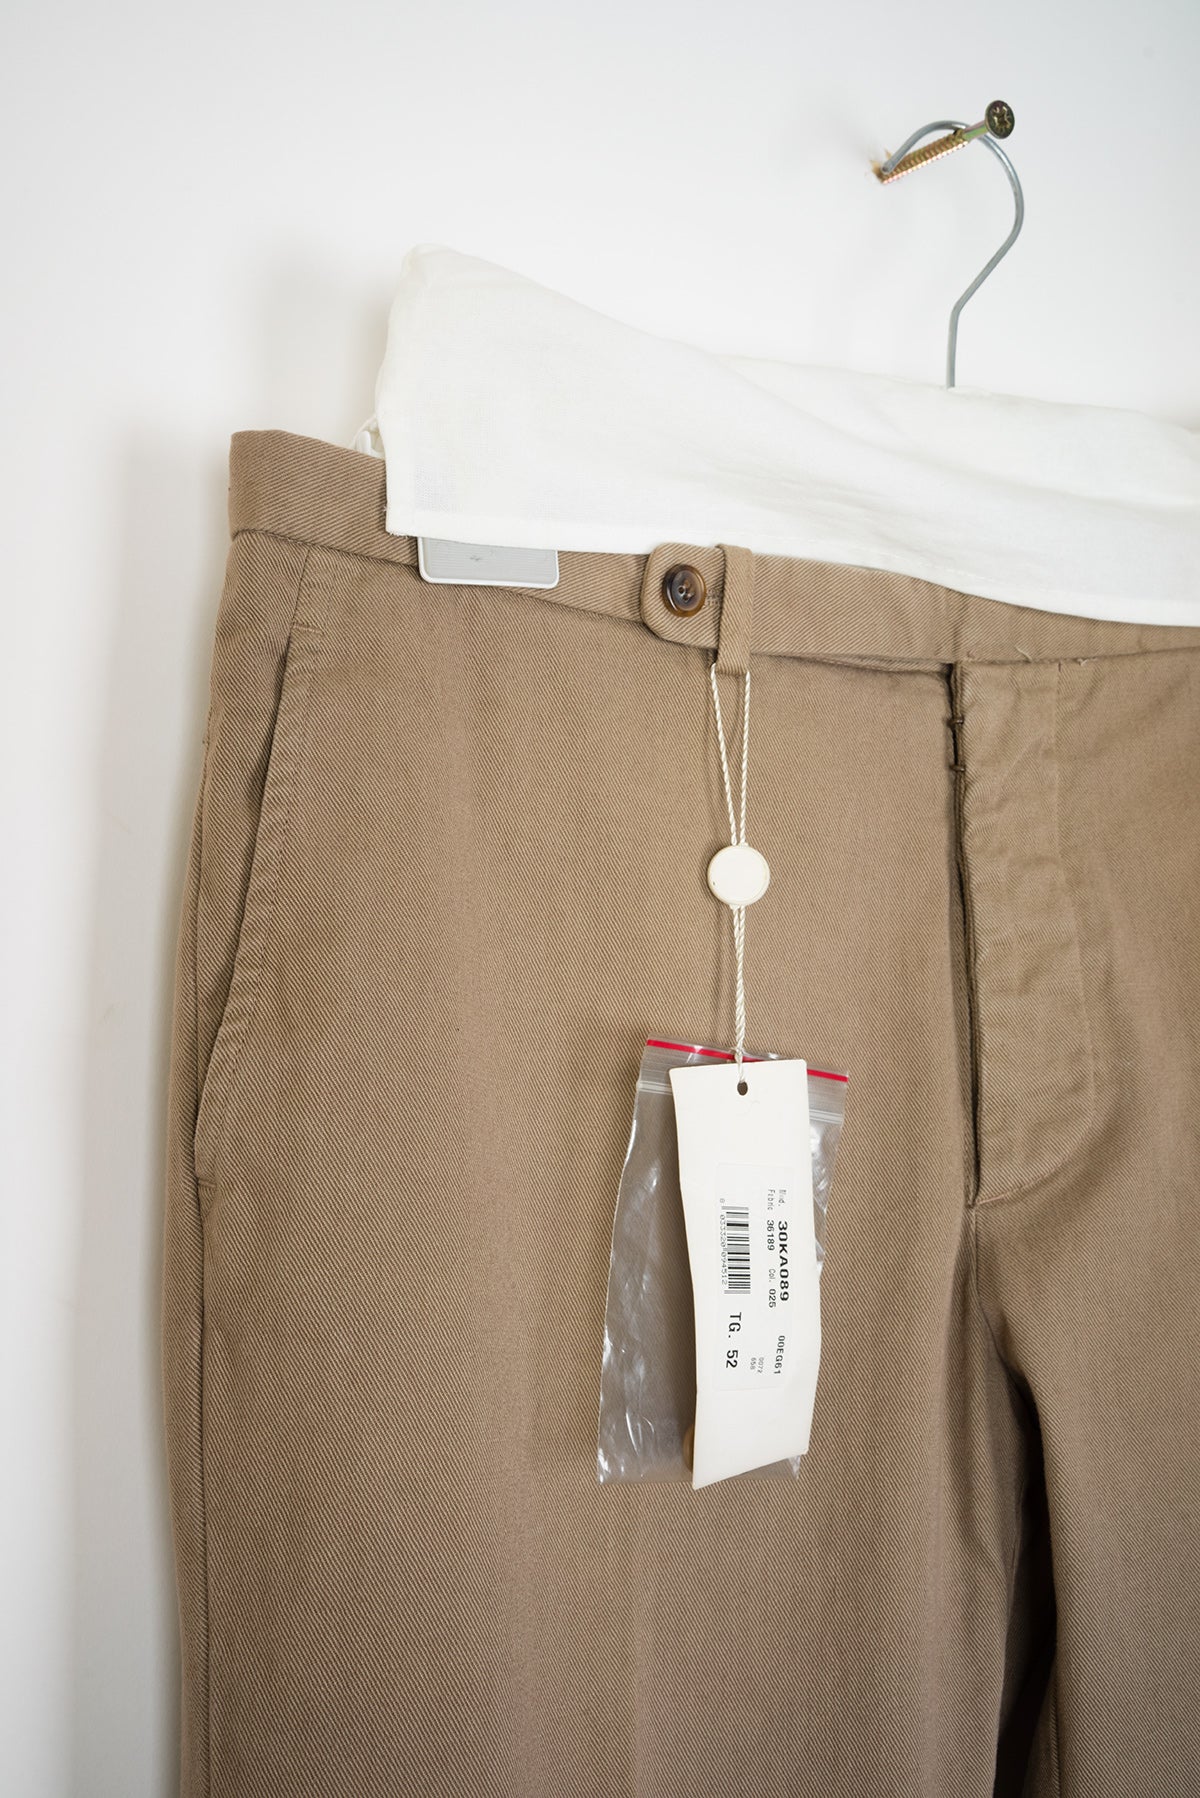 2007 A/W TROUSERS IN A HEAVY TWILL COTTON